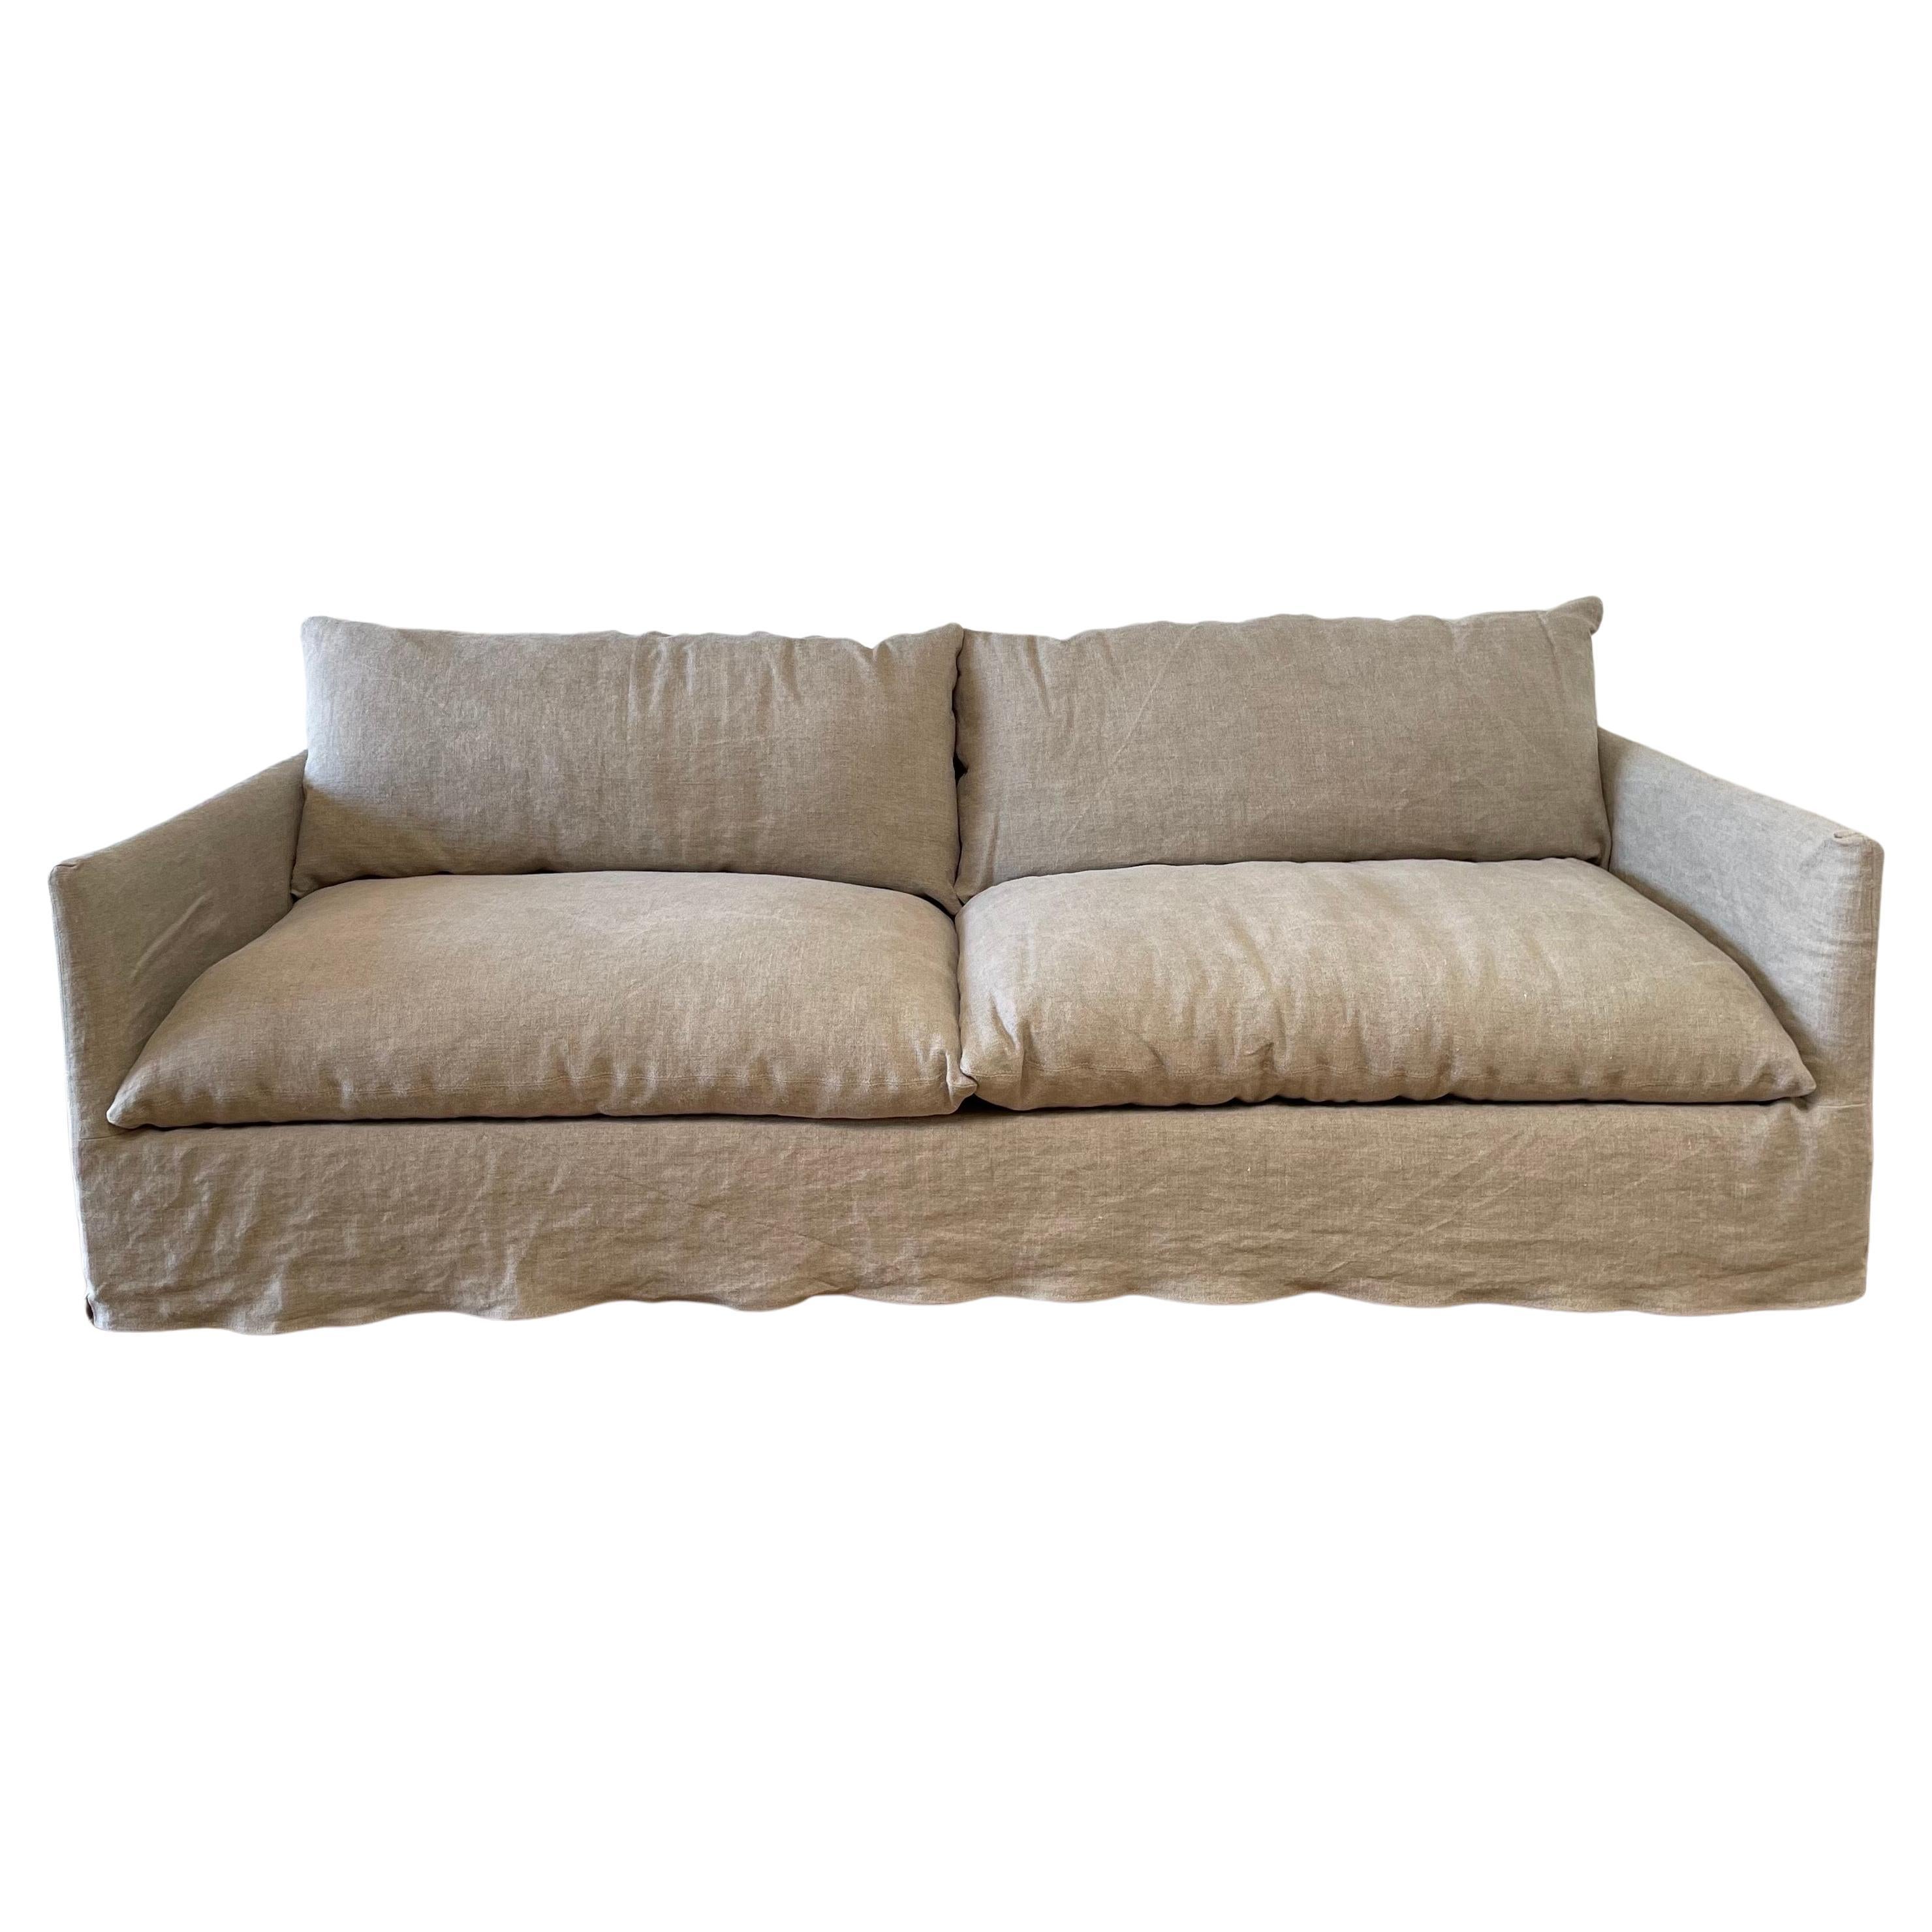 New Custom Stone Washed Irish Linen Slip Covered Sofa with Down Alt Cushions For Sale 4